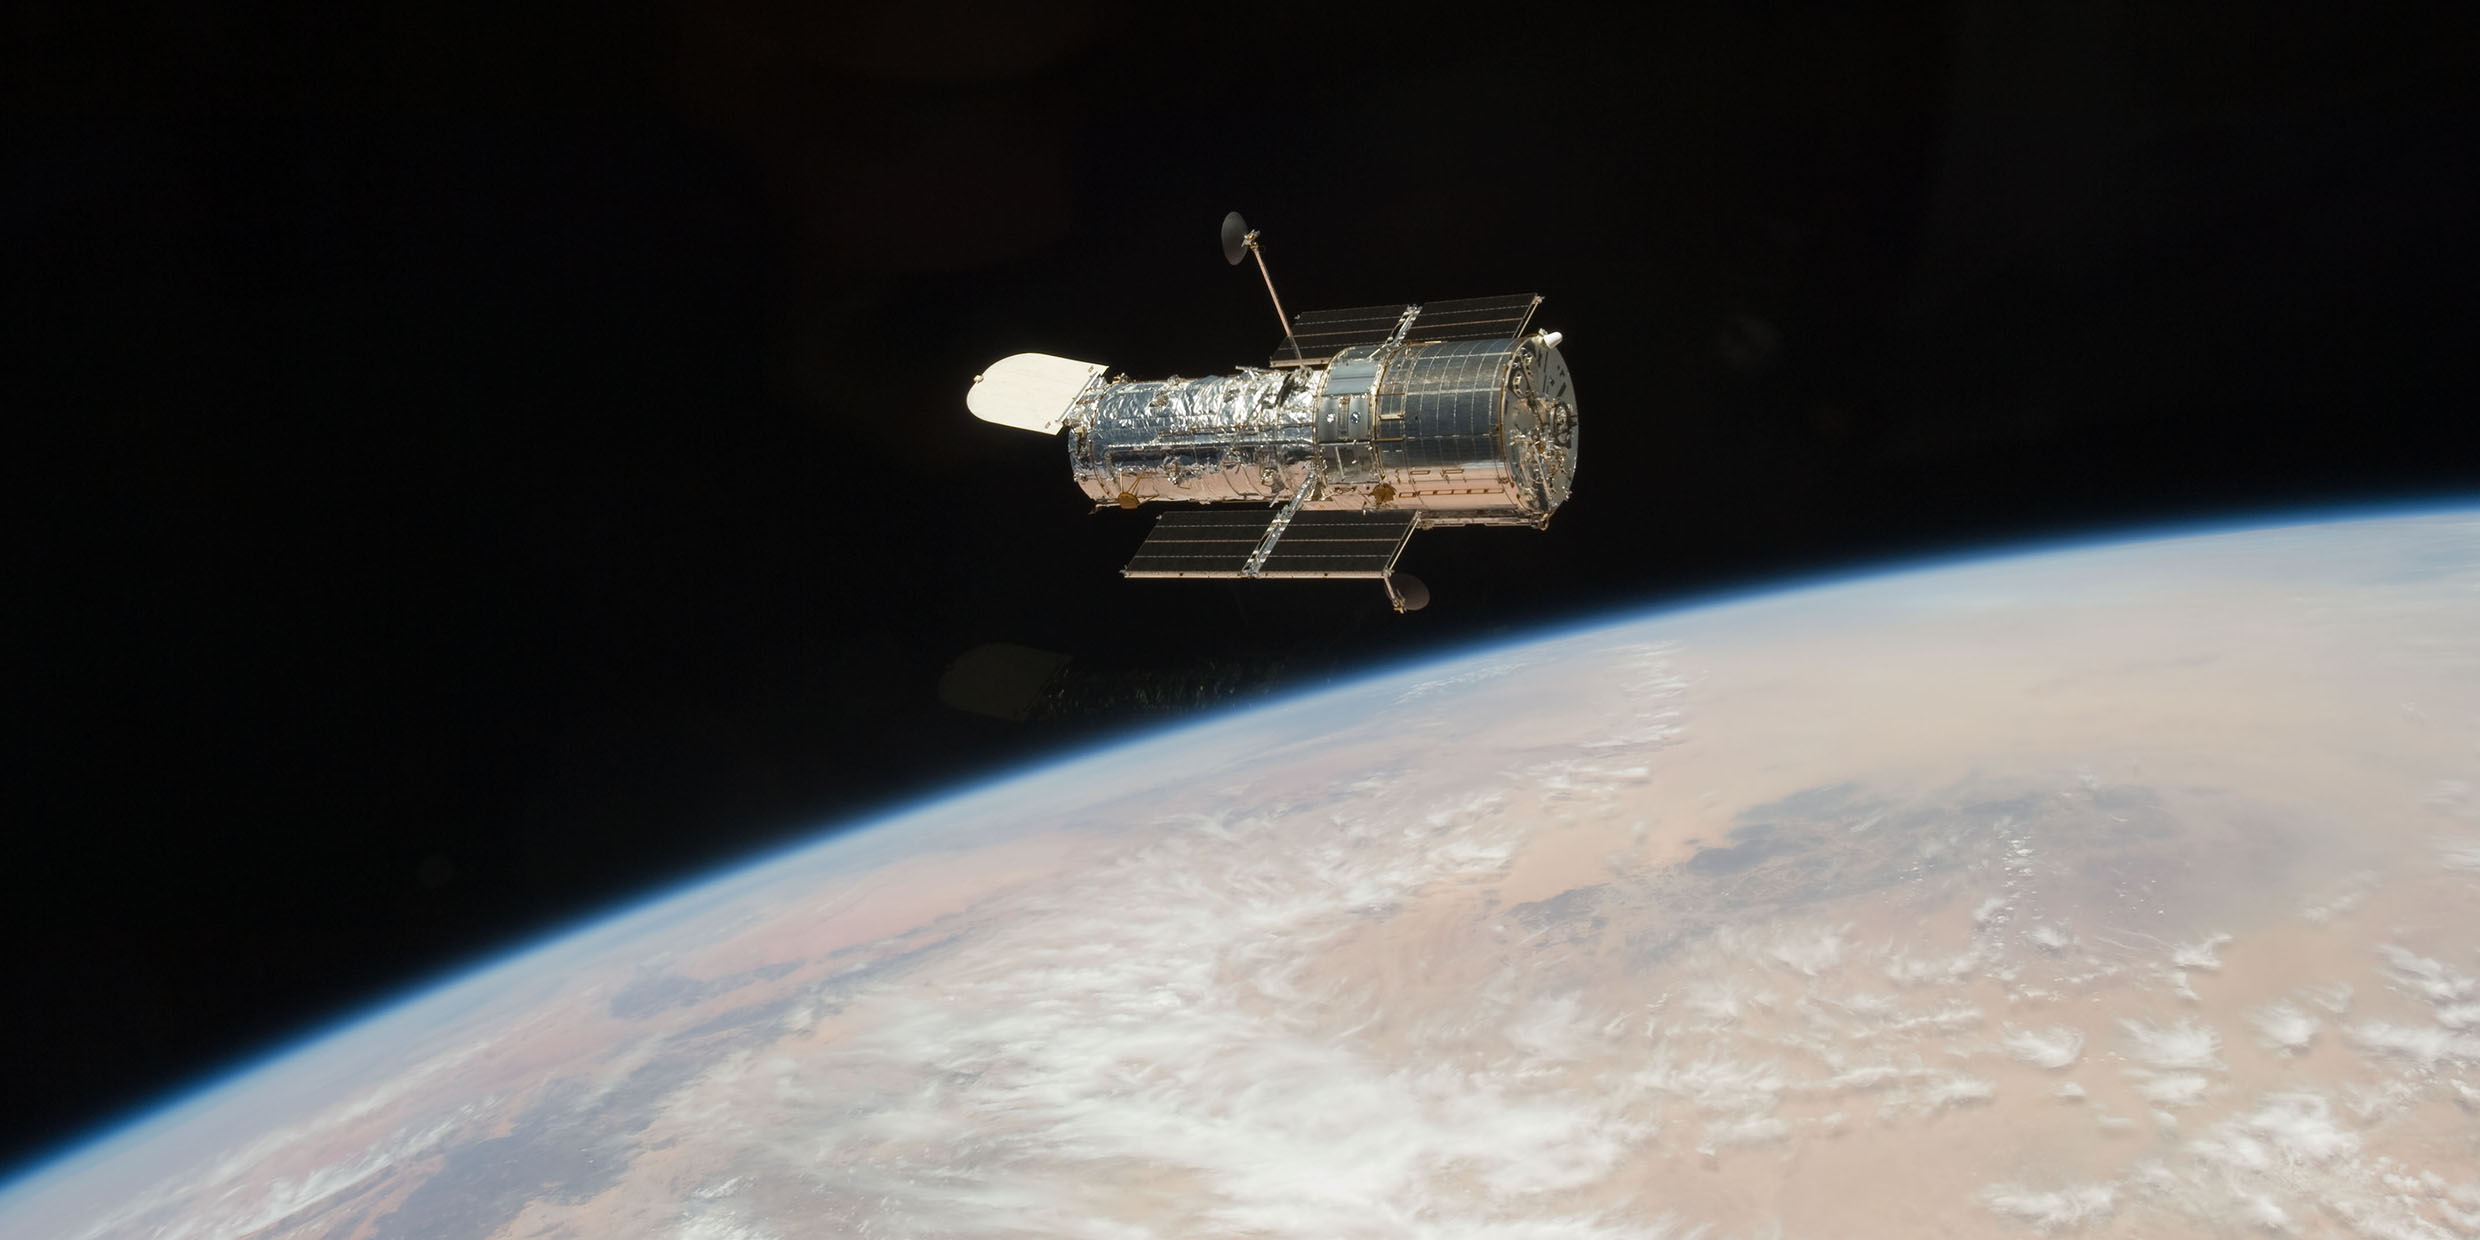 Image of the Hubble Space Telescope in orbit above Earth